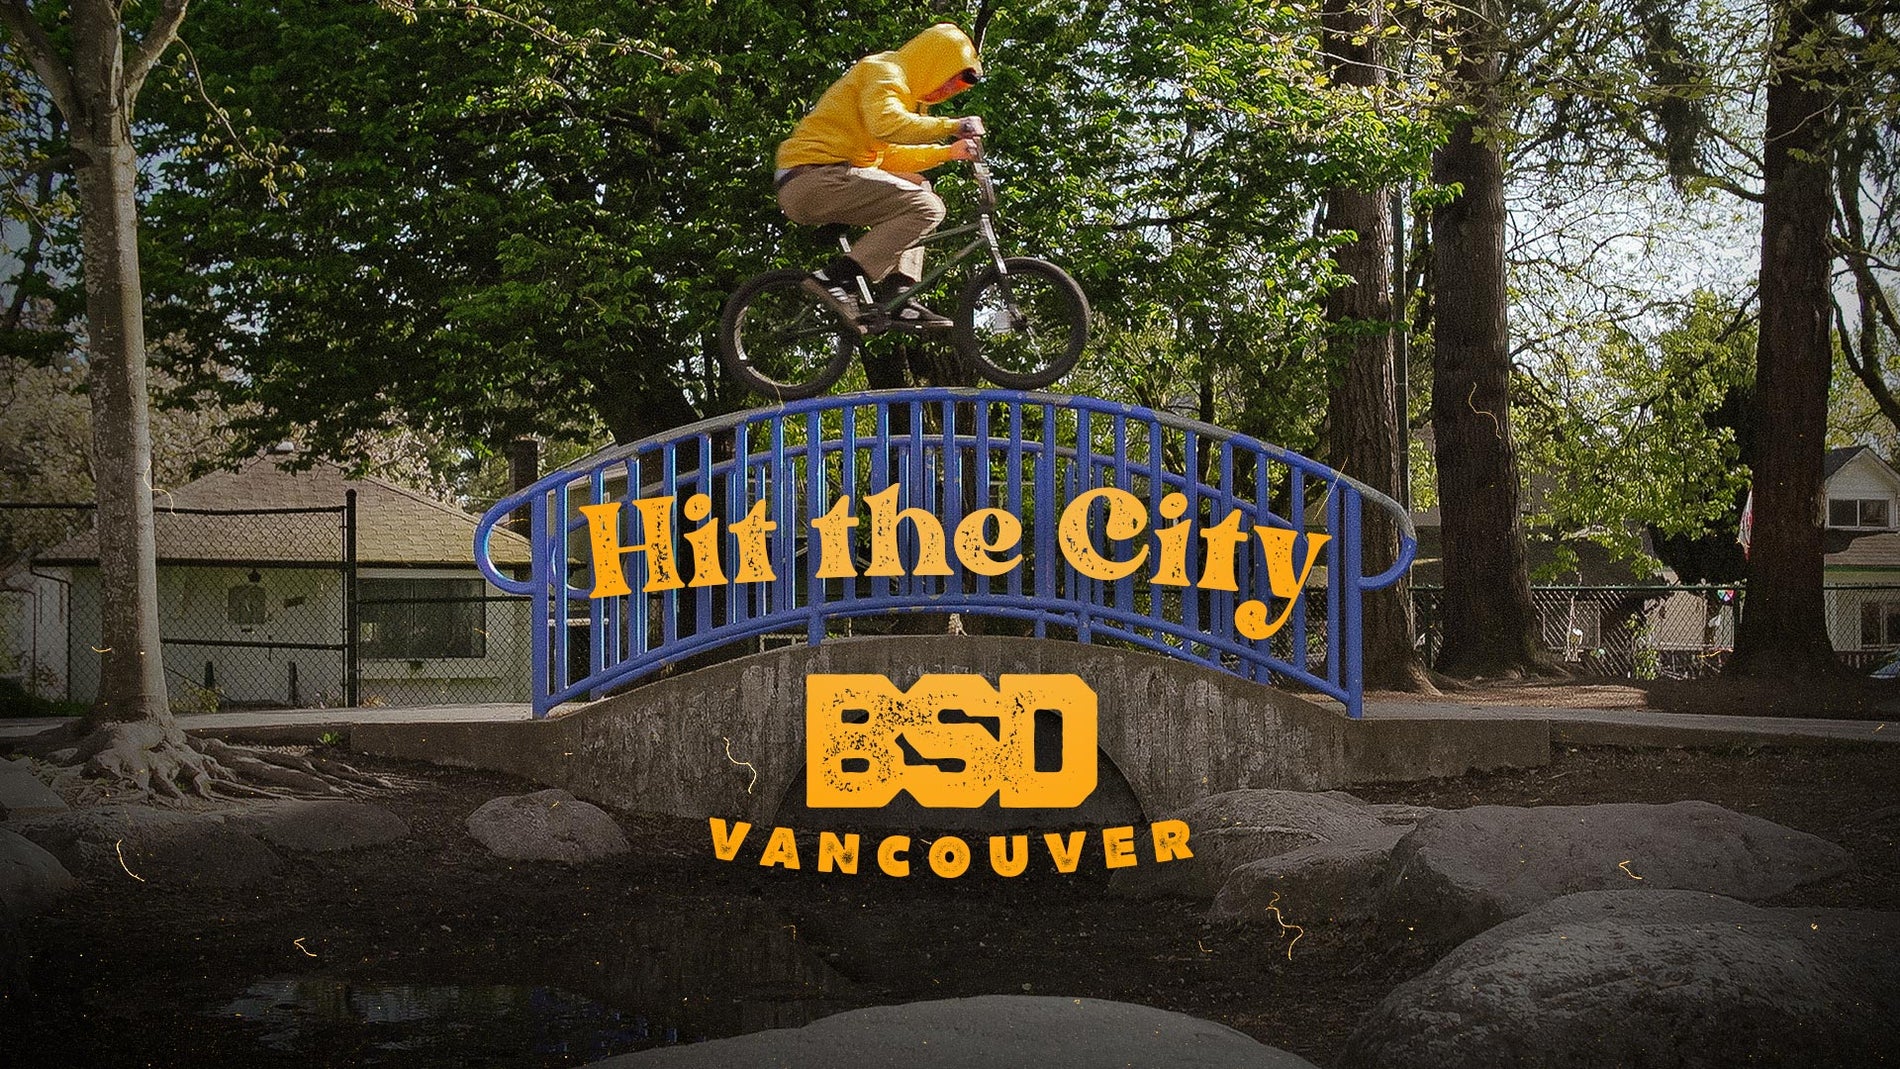 Hit the City, BSD Vancouver Video